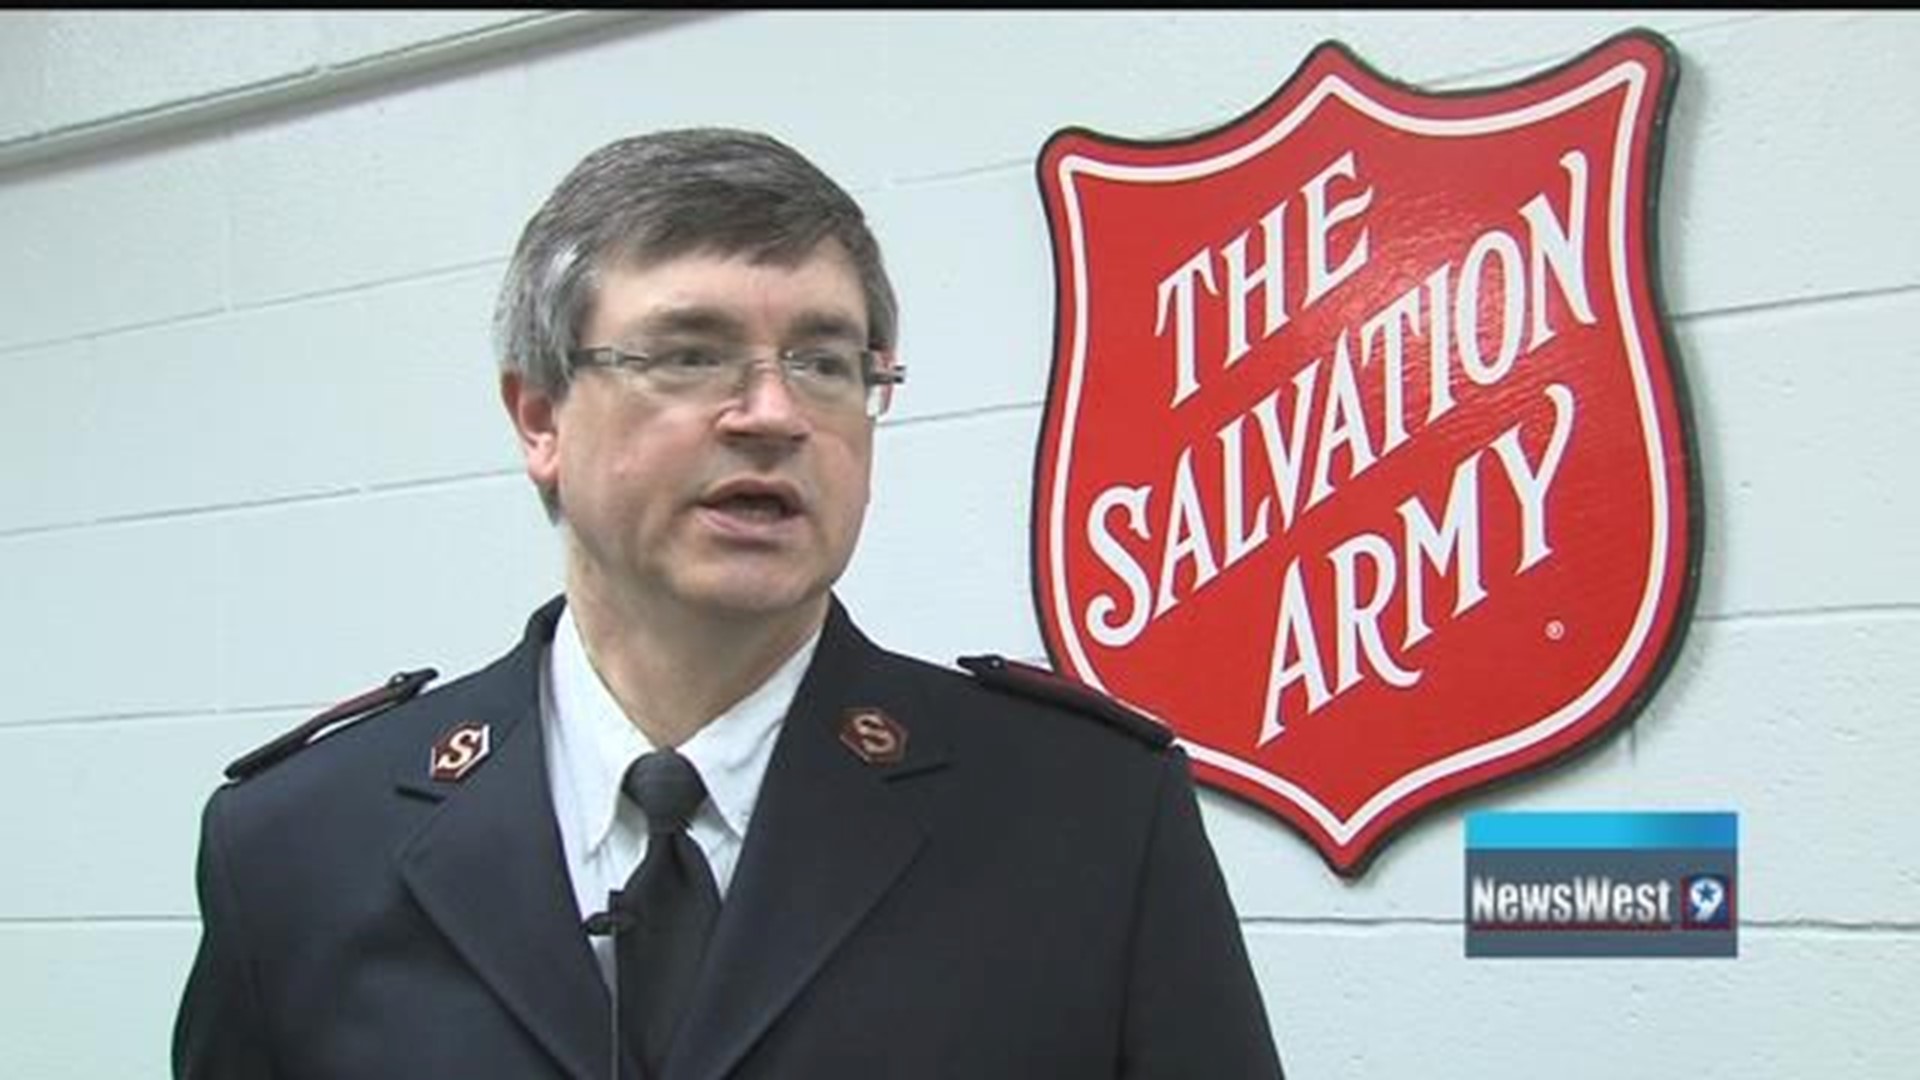 Permian Basin Area Foundation gives $100k to the Odessa Salvation Army